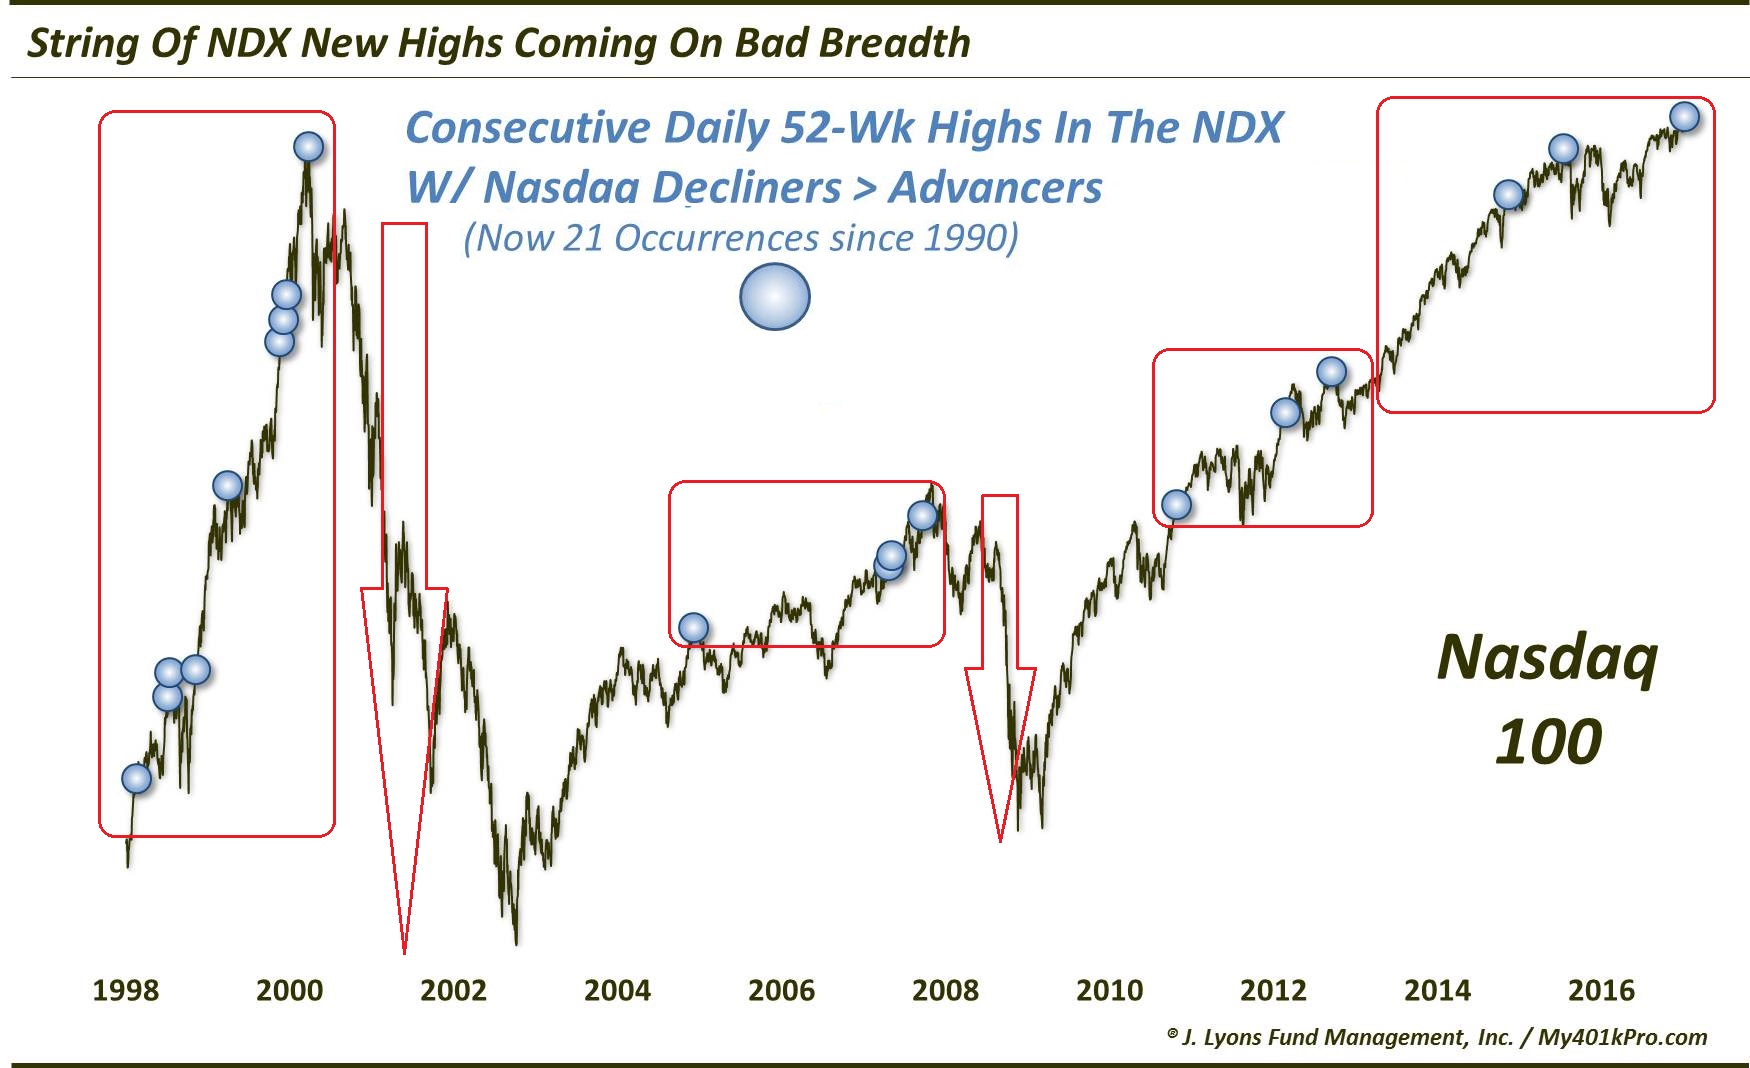 CAUTION: Strings of NDX Highs on Bad Breadth Typically Does Not Bode Well!